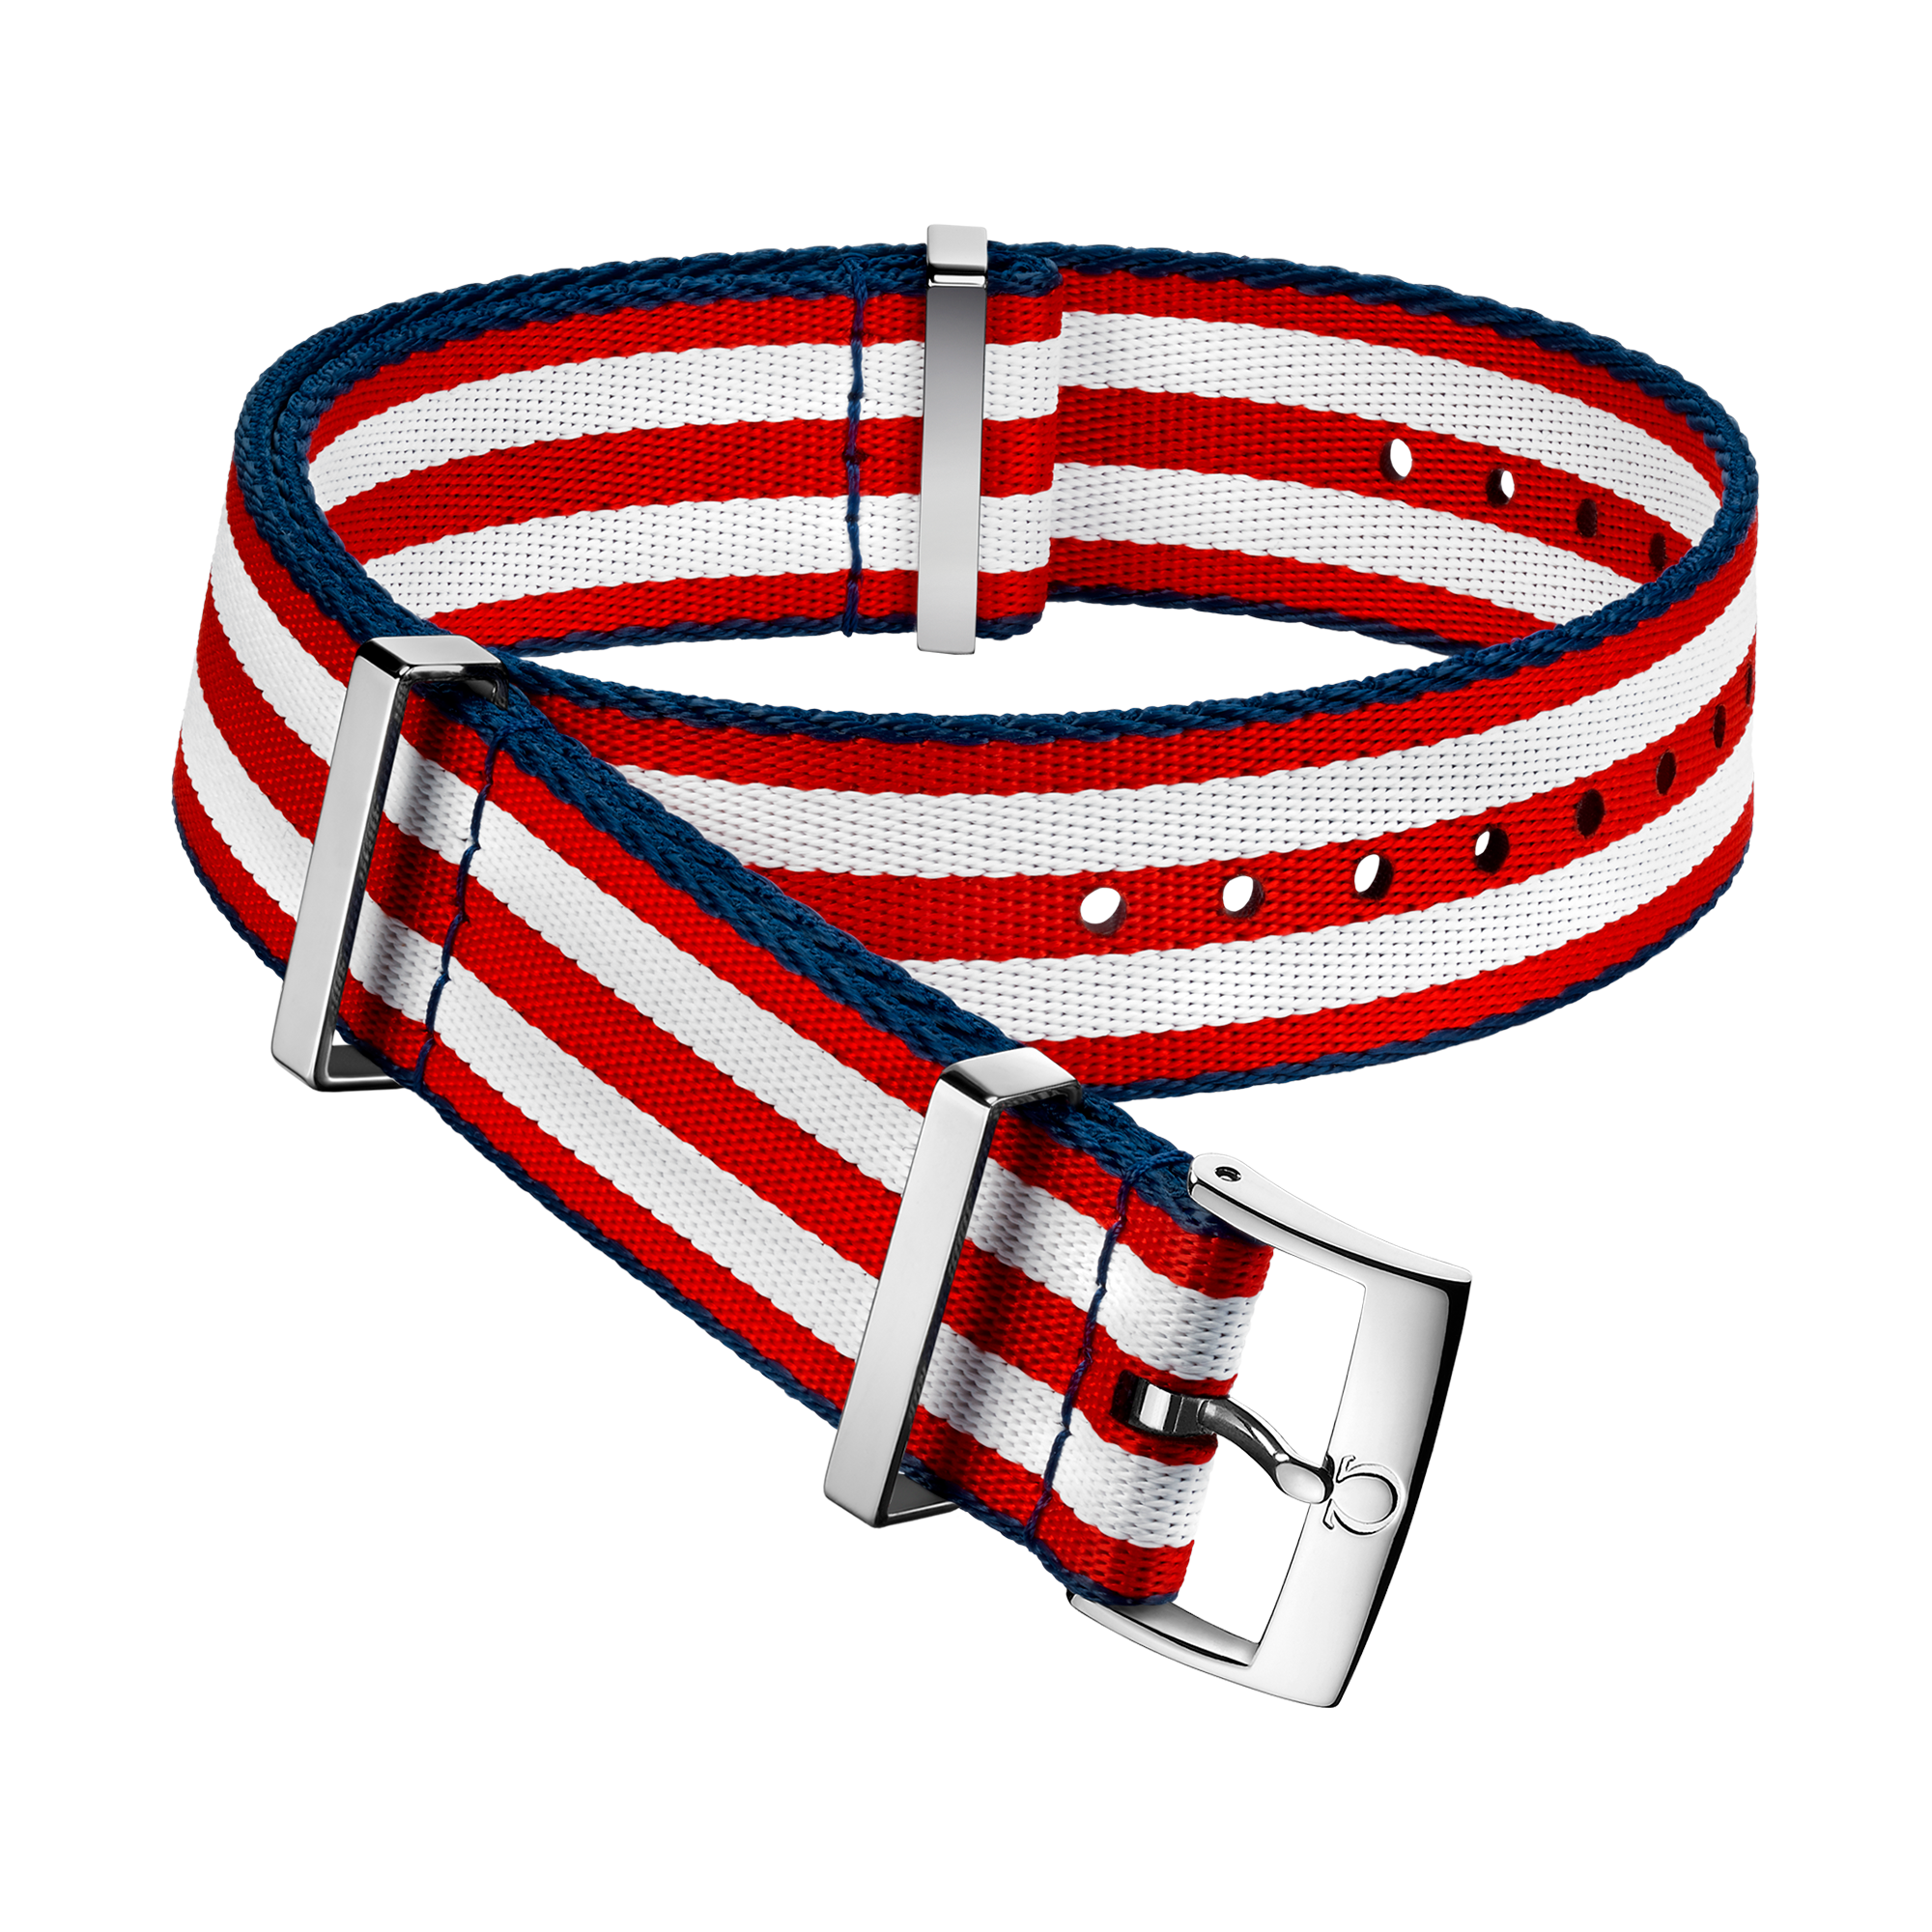 NATO strap - Polyamide 5-stripe red and white strap with blue borders - 031CWZ010616